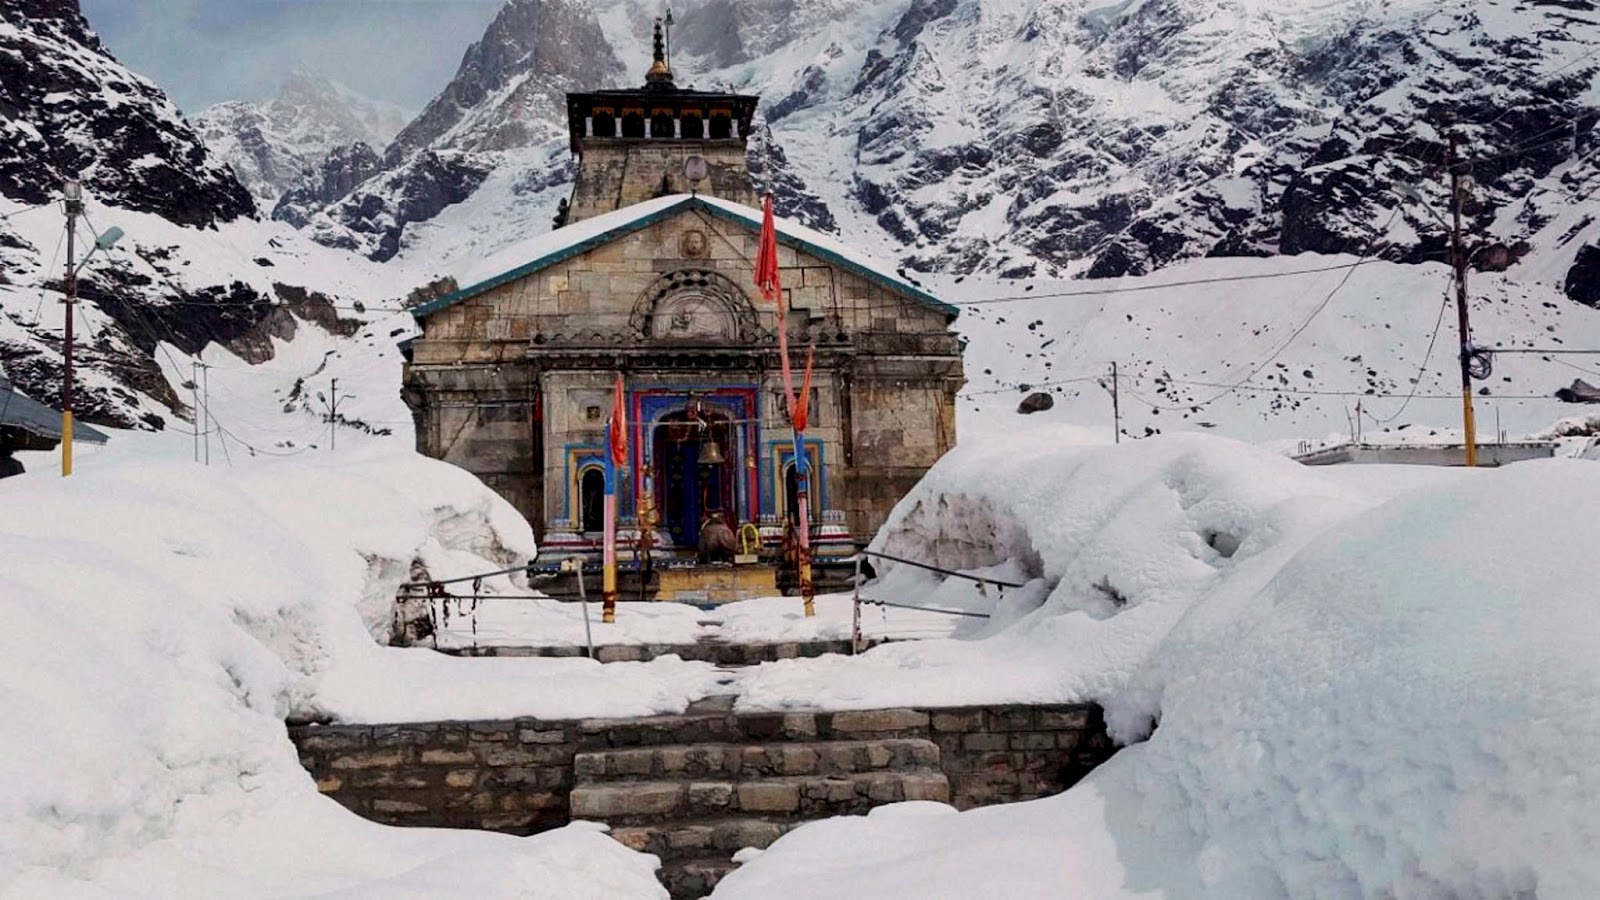 Trek to Kedarnath Temple at the Source of the Ganges